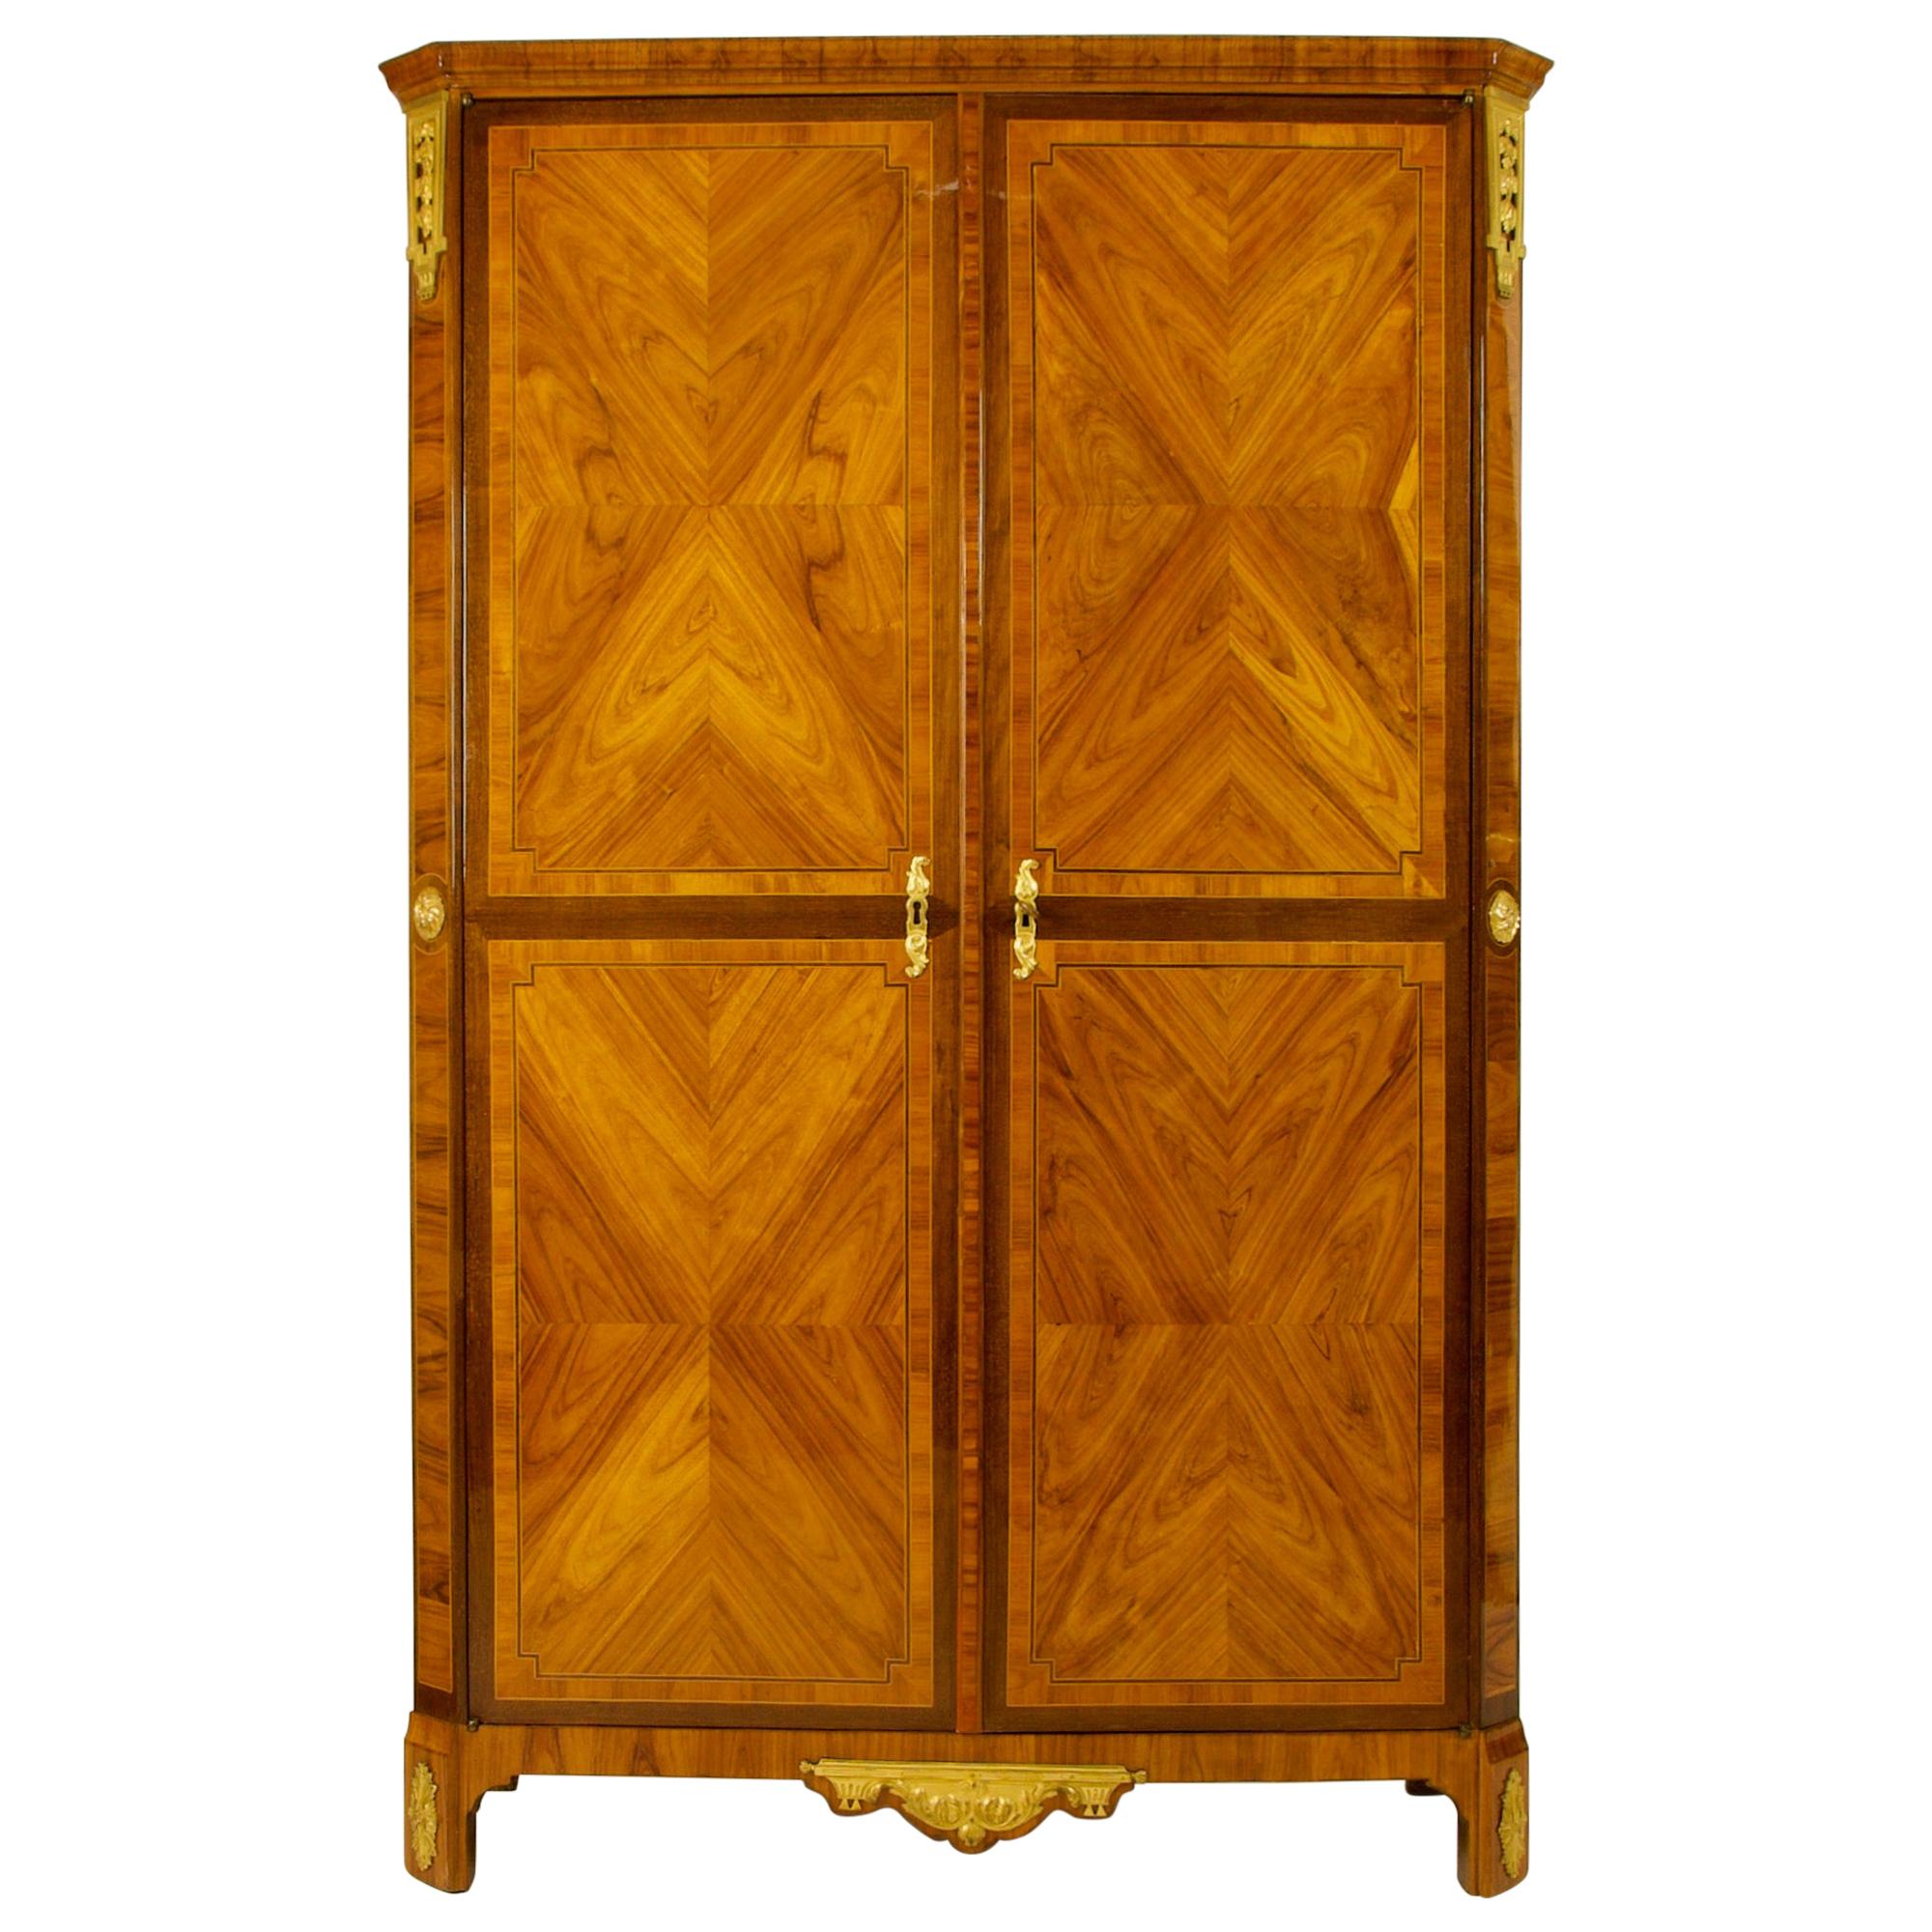 French 18th Century Louis XVI Marquetry Cabinet by Roger Vandercruse/Lacroix